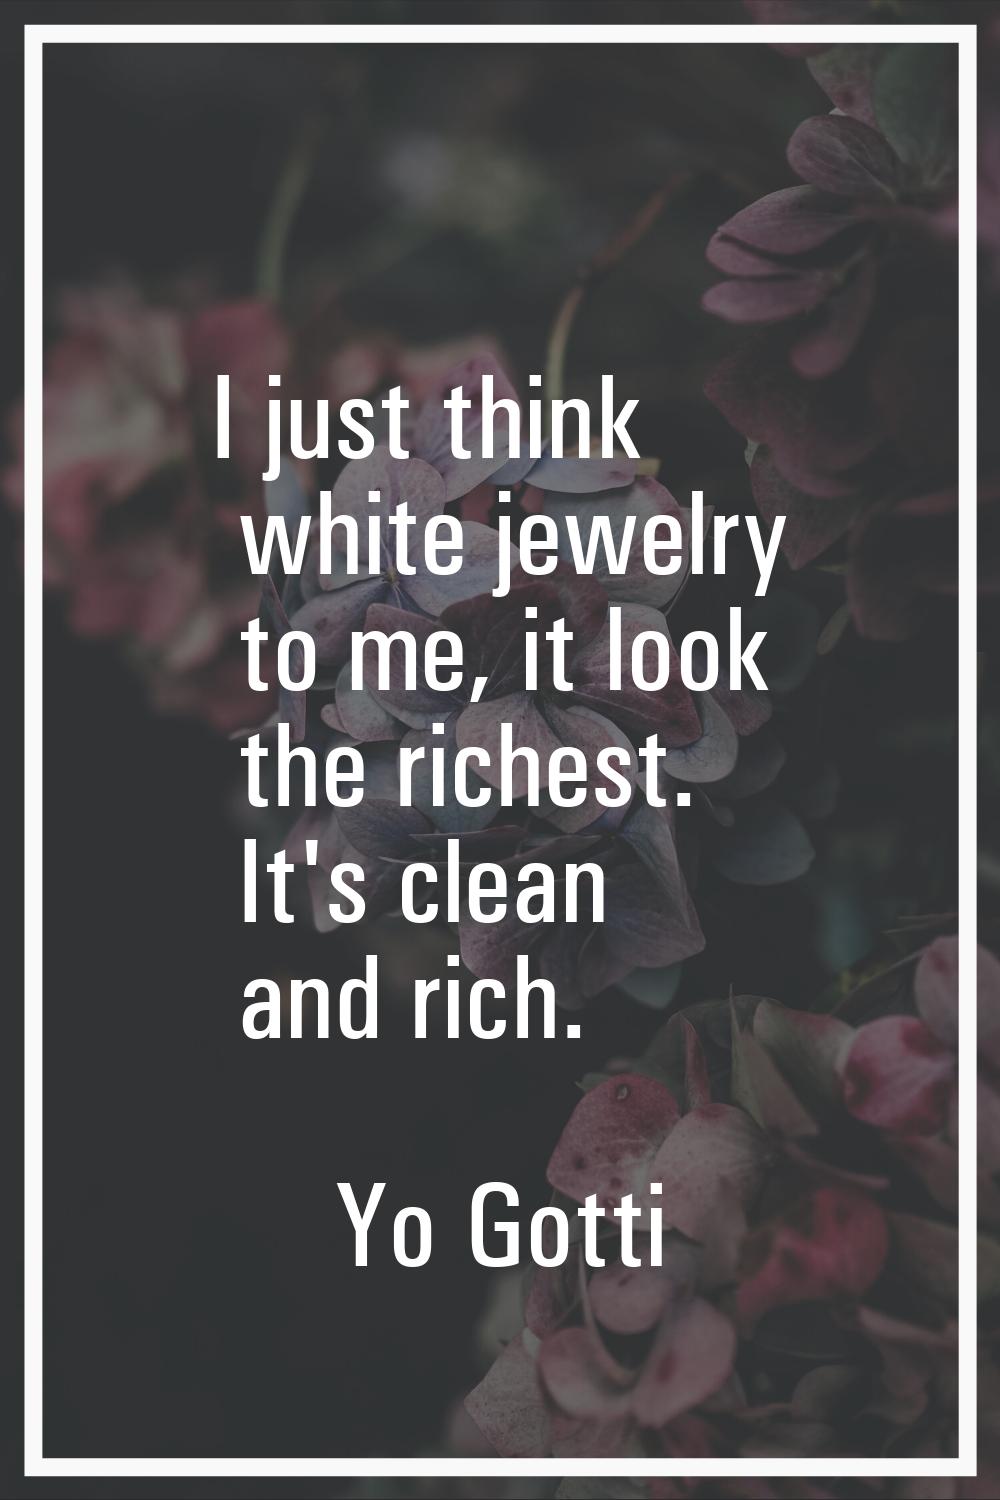 I just think white jewelry to me, it look the richest. It's clean and rich.